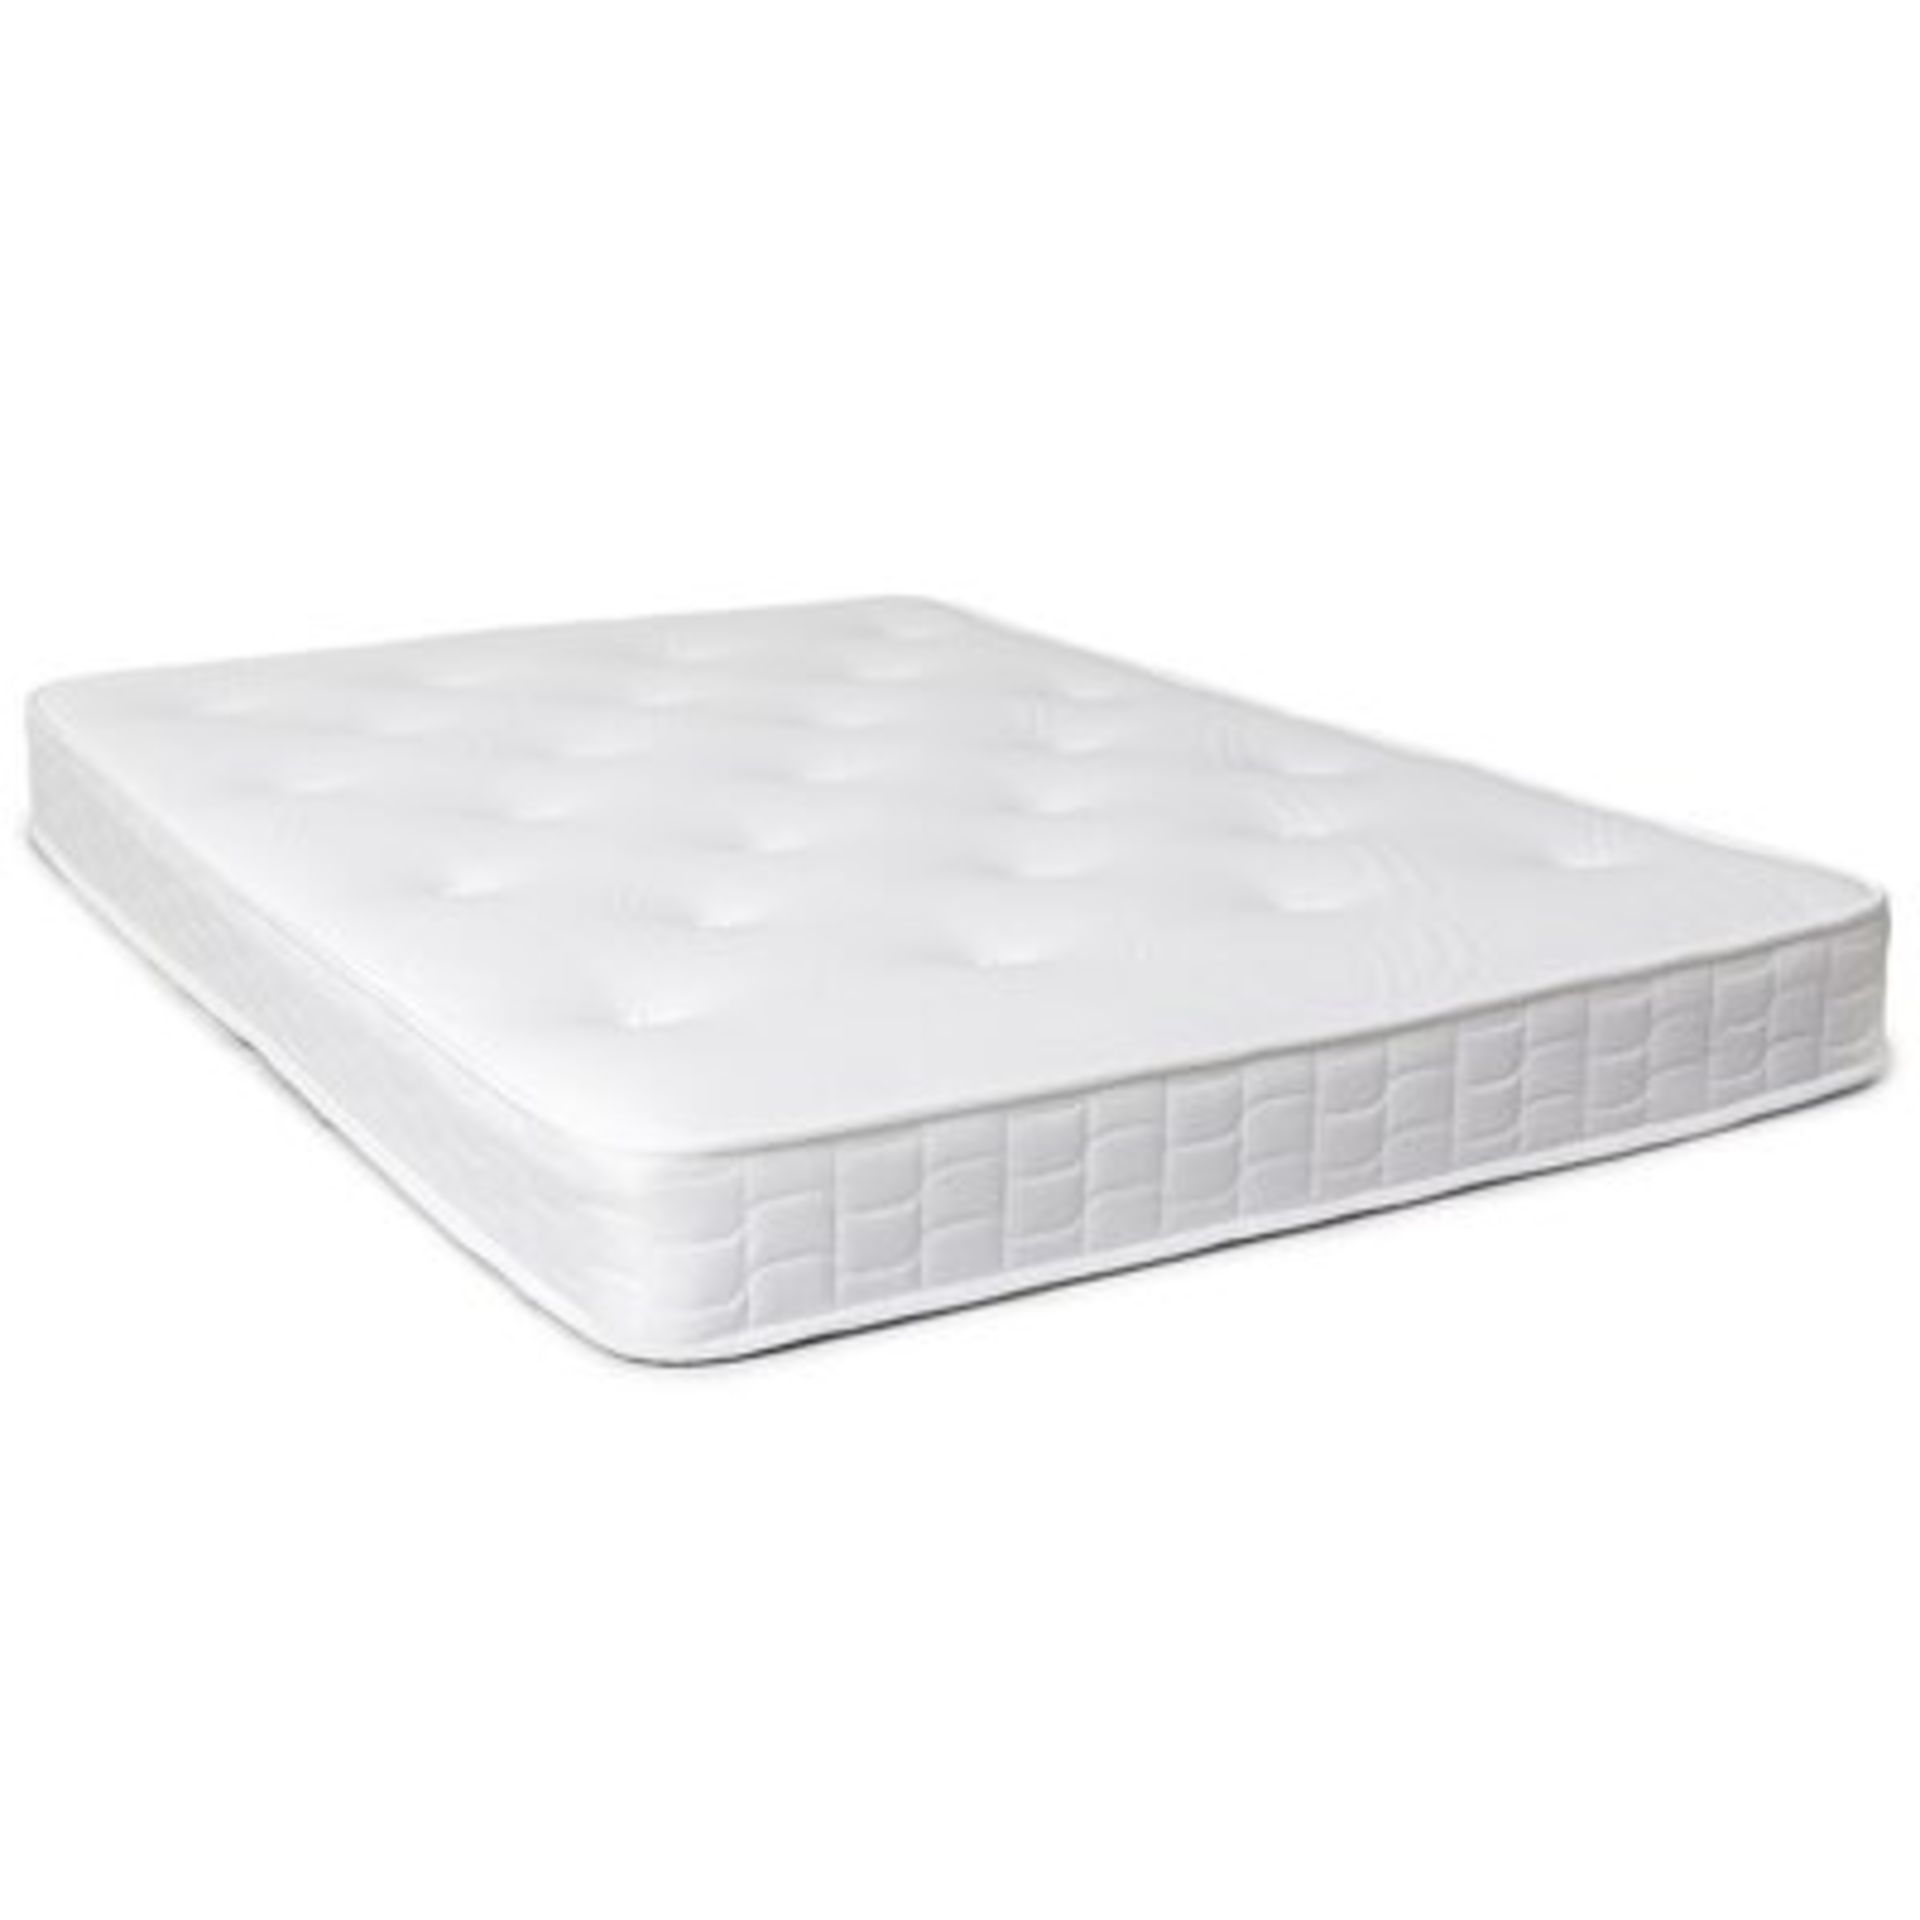 Rolled up Memory Open Coil Mattress. 90x190cm. This medium-firm mattress has been designed to